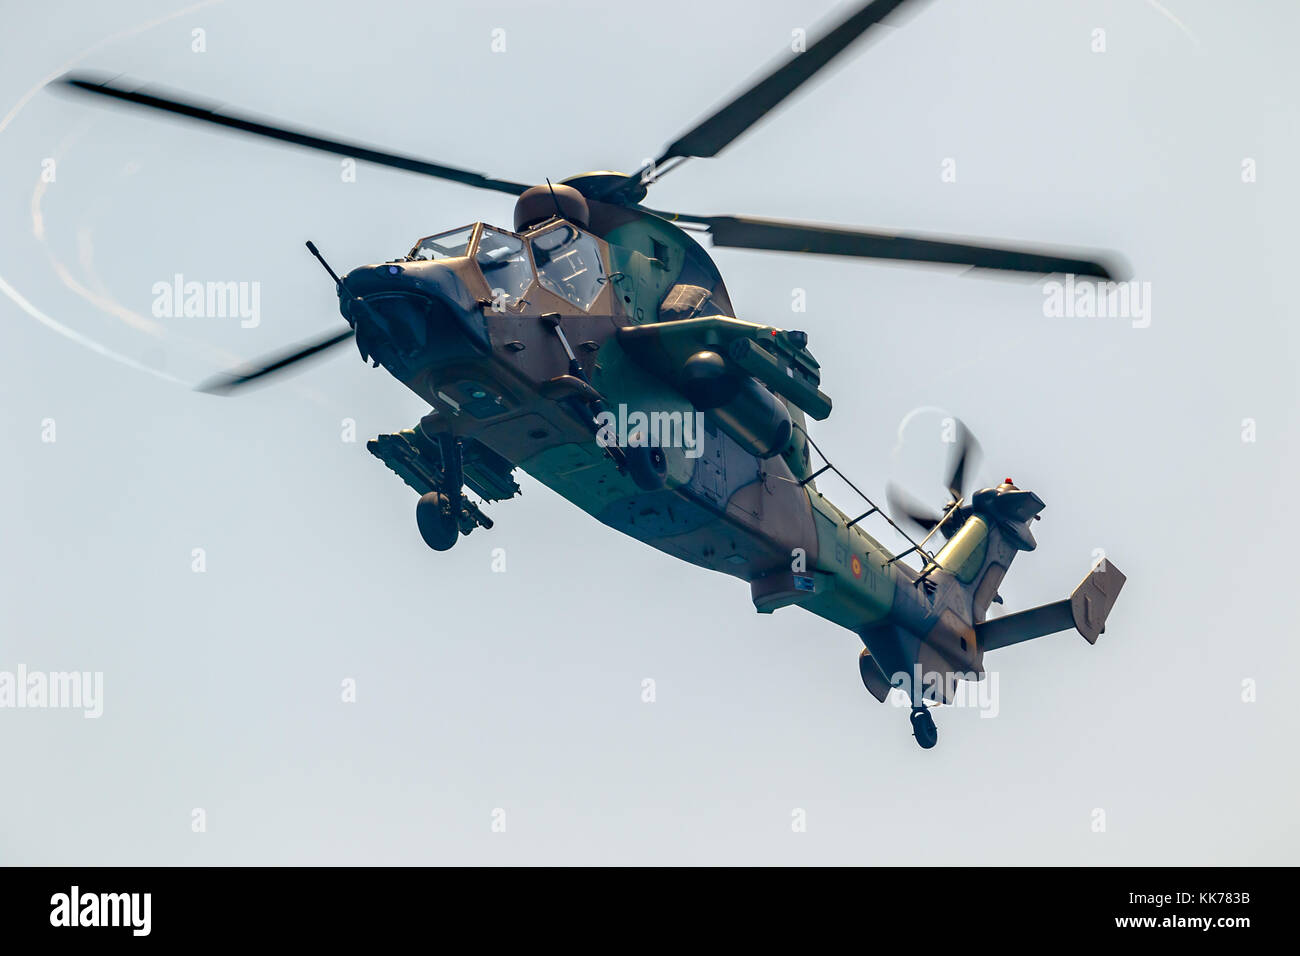 TORRE DEL MAR, MALAGA, SPAIN-JUL 28: Helicopter Eurocopter EC665 Tiger taking part in a exhibition on the 2nd airshow of Torre del Mar on July 28, 201 Stock Photo